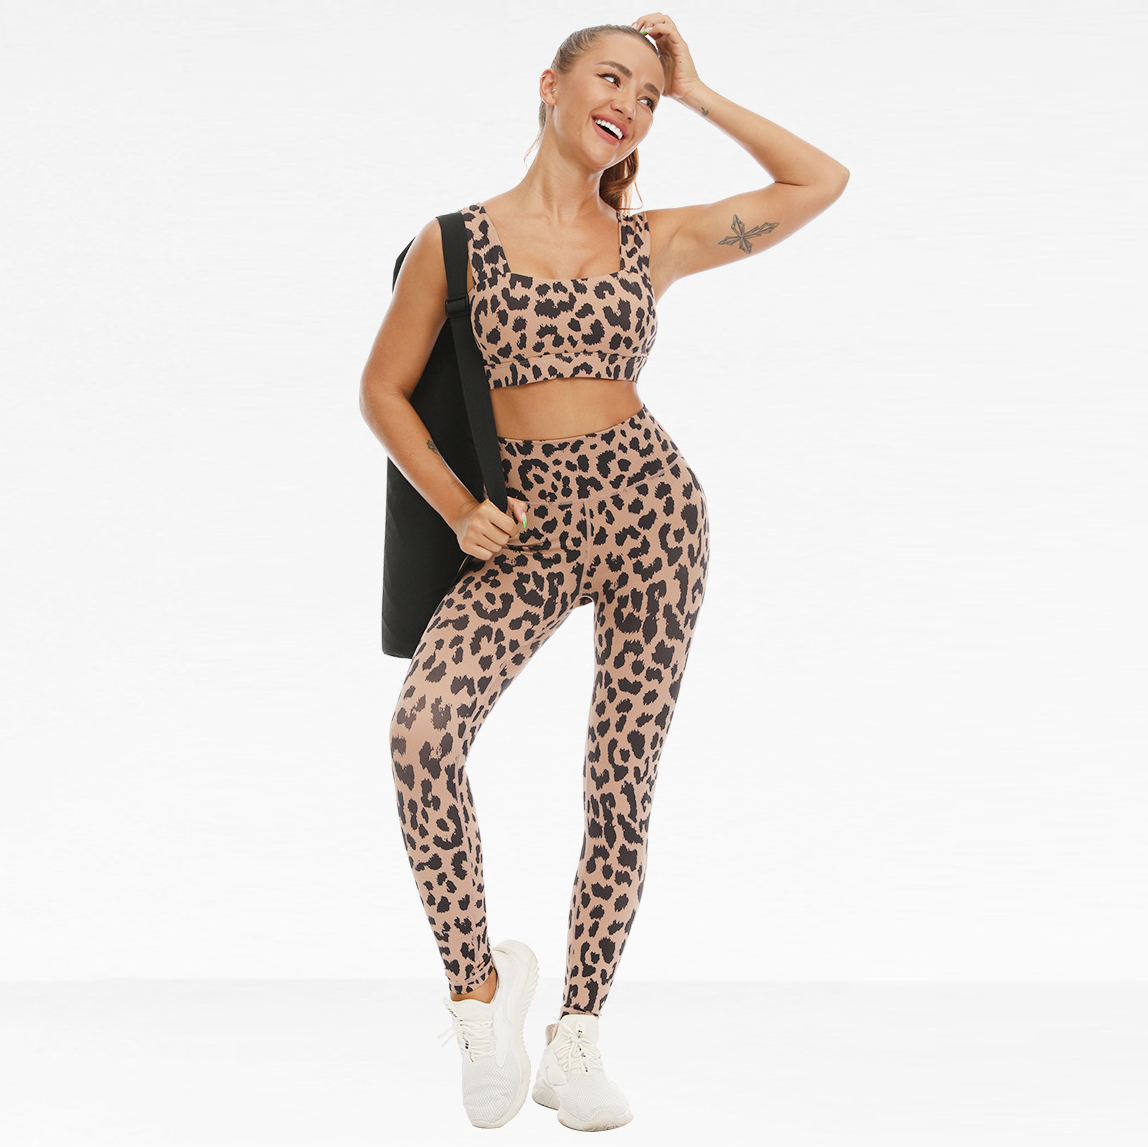 Leopard print yoga wears leggings stretches two pieces (7)